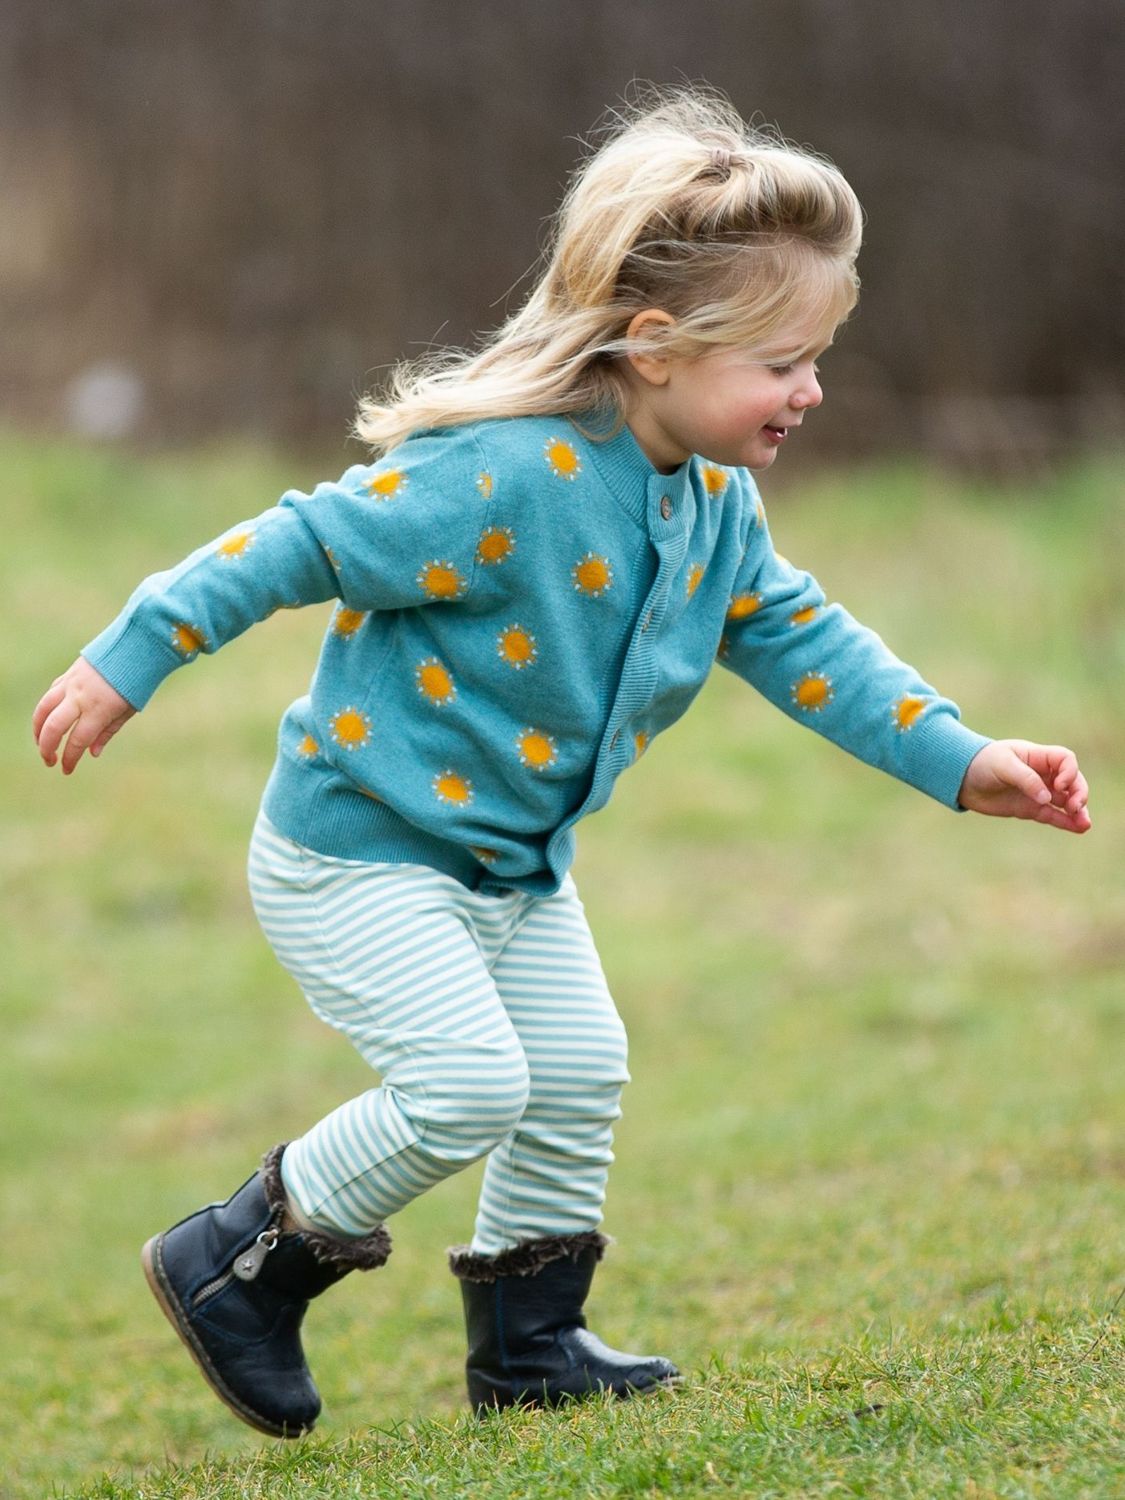 Buy Little Green Radicals Kids' Adaptive Striped Joggers Online at johnlewis.com